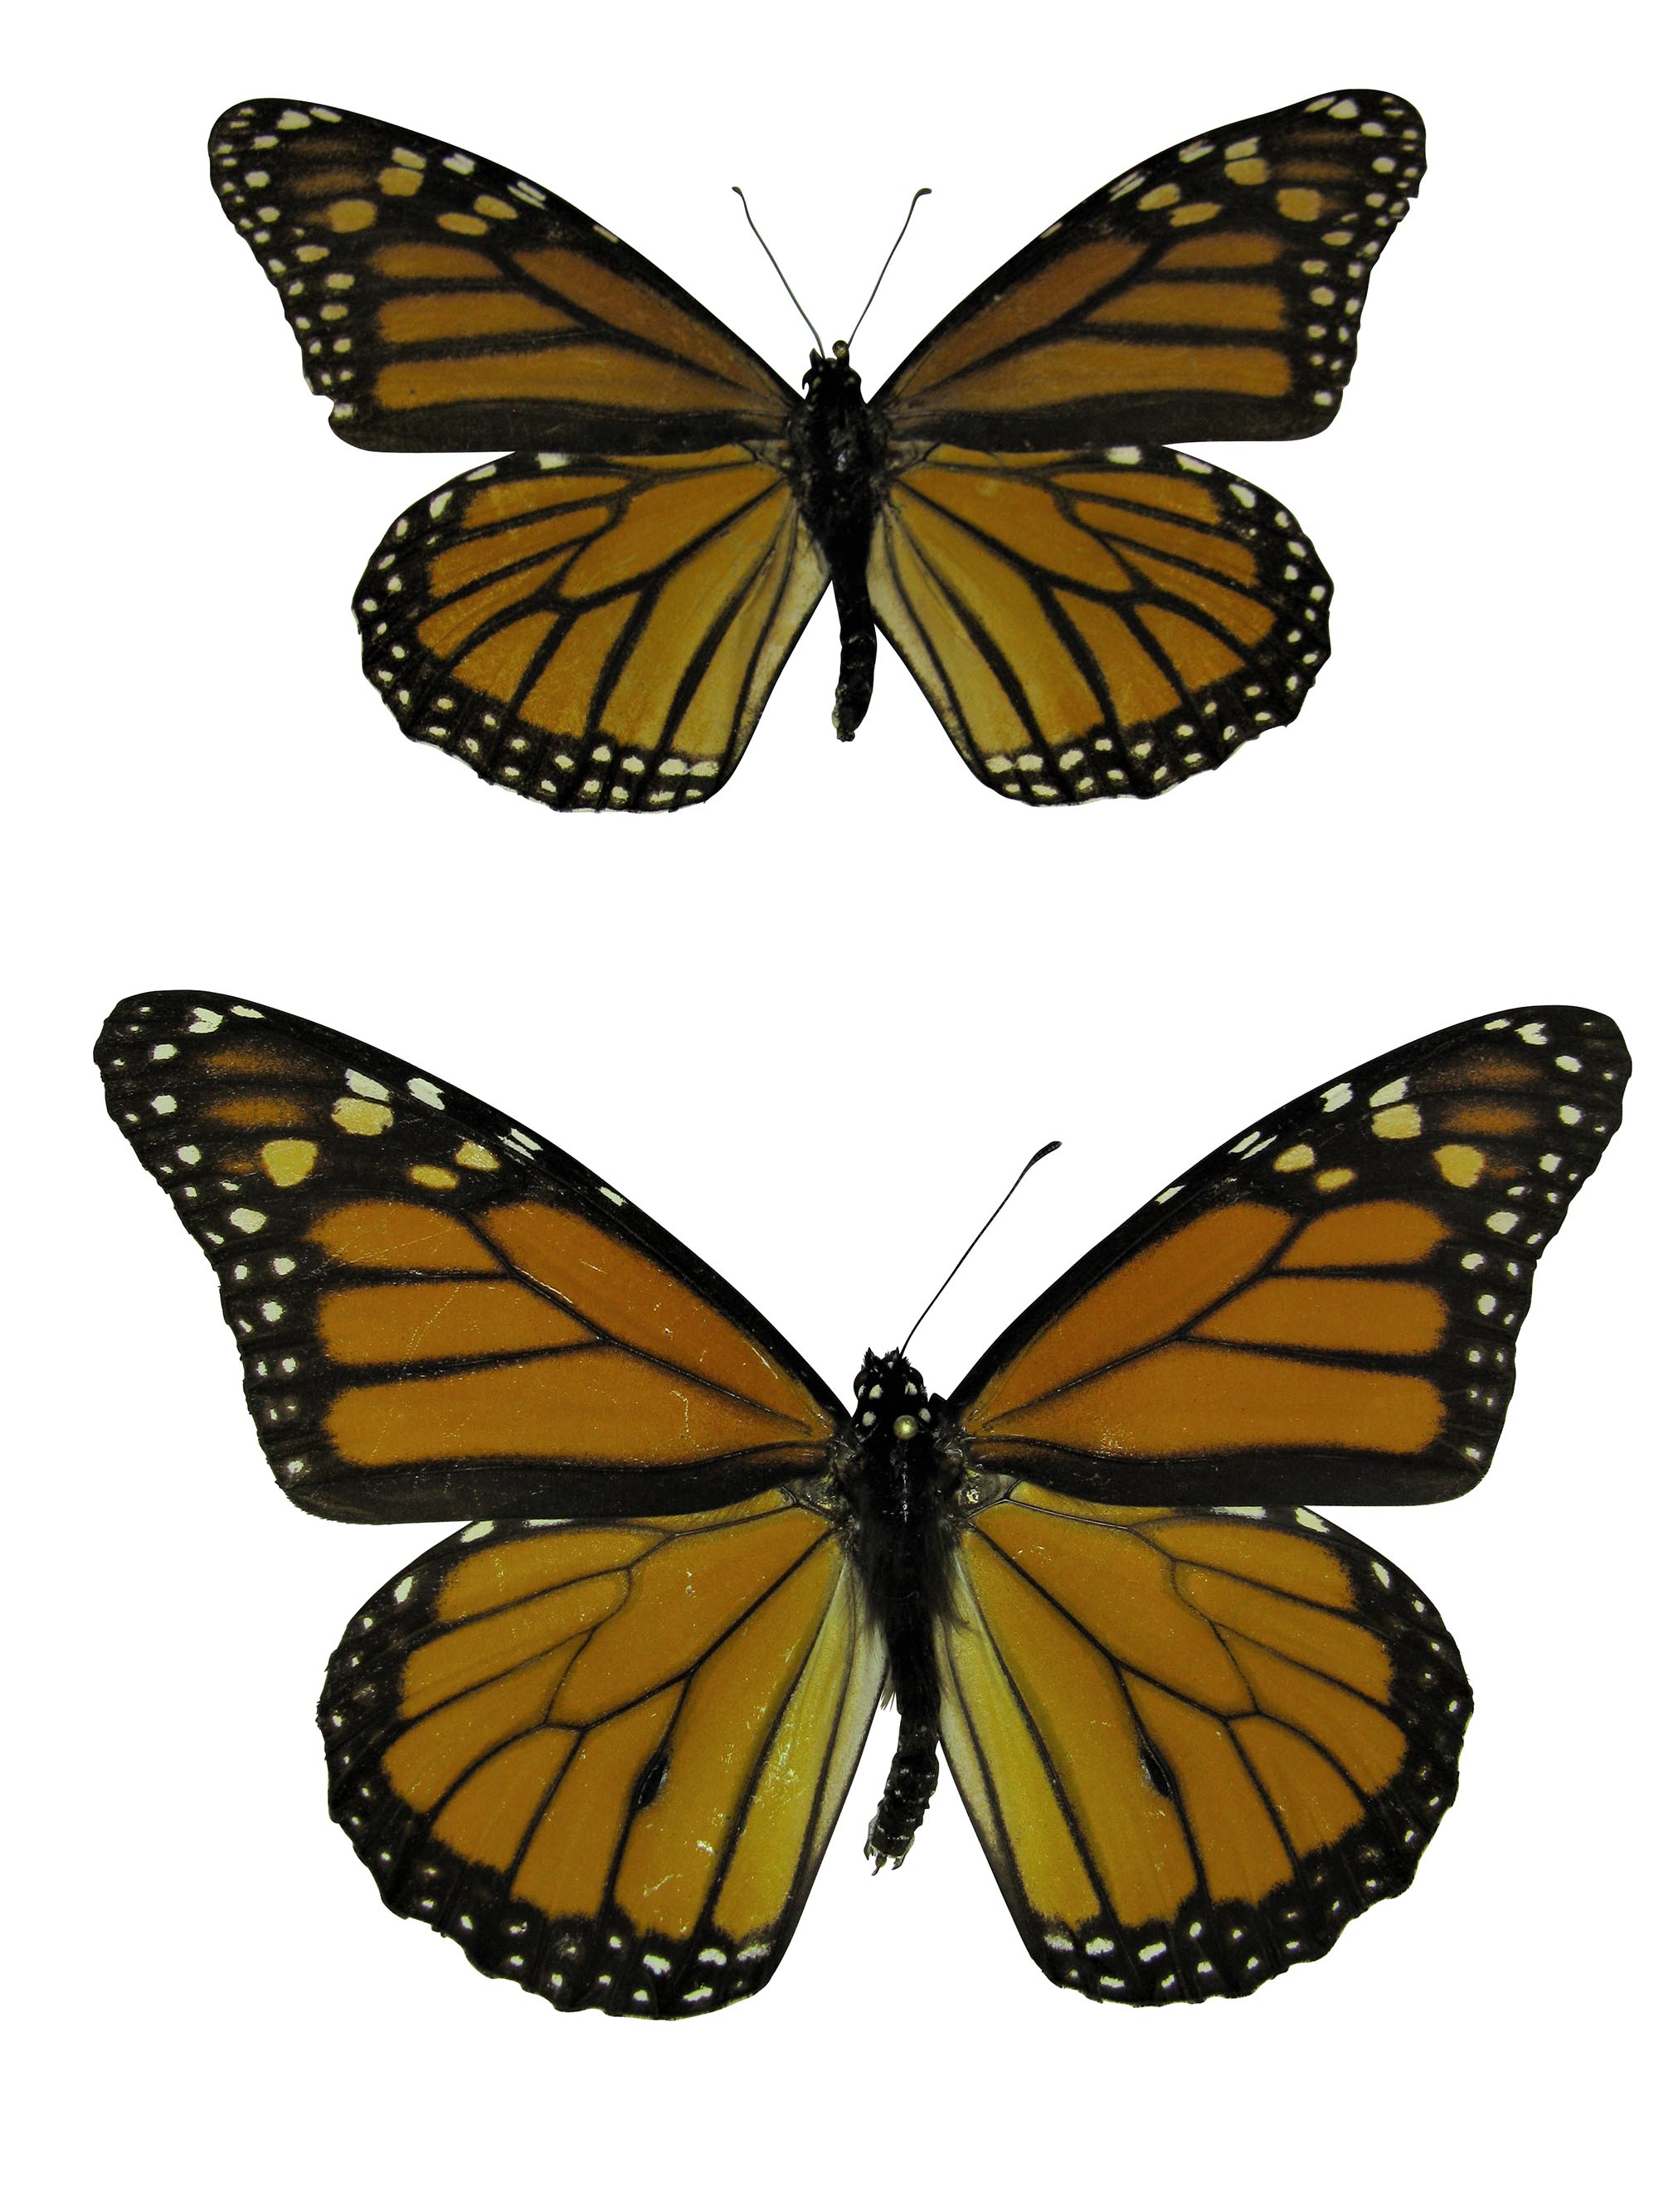 Male and Female Monarch Butterfly